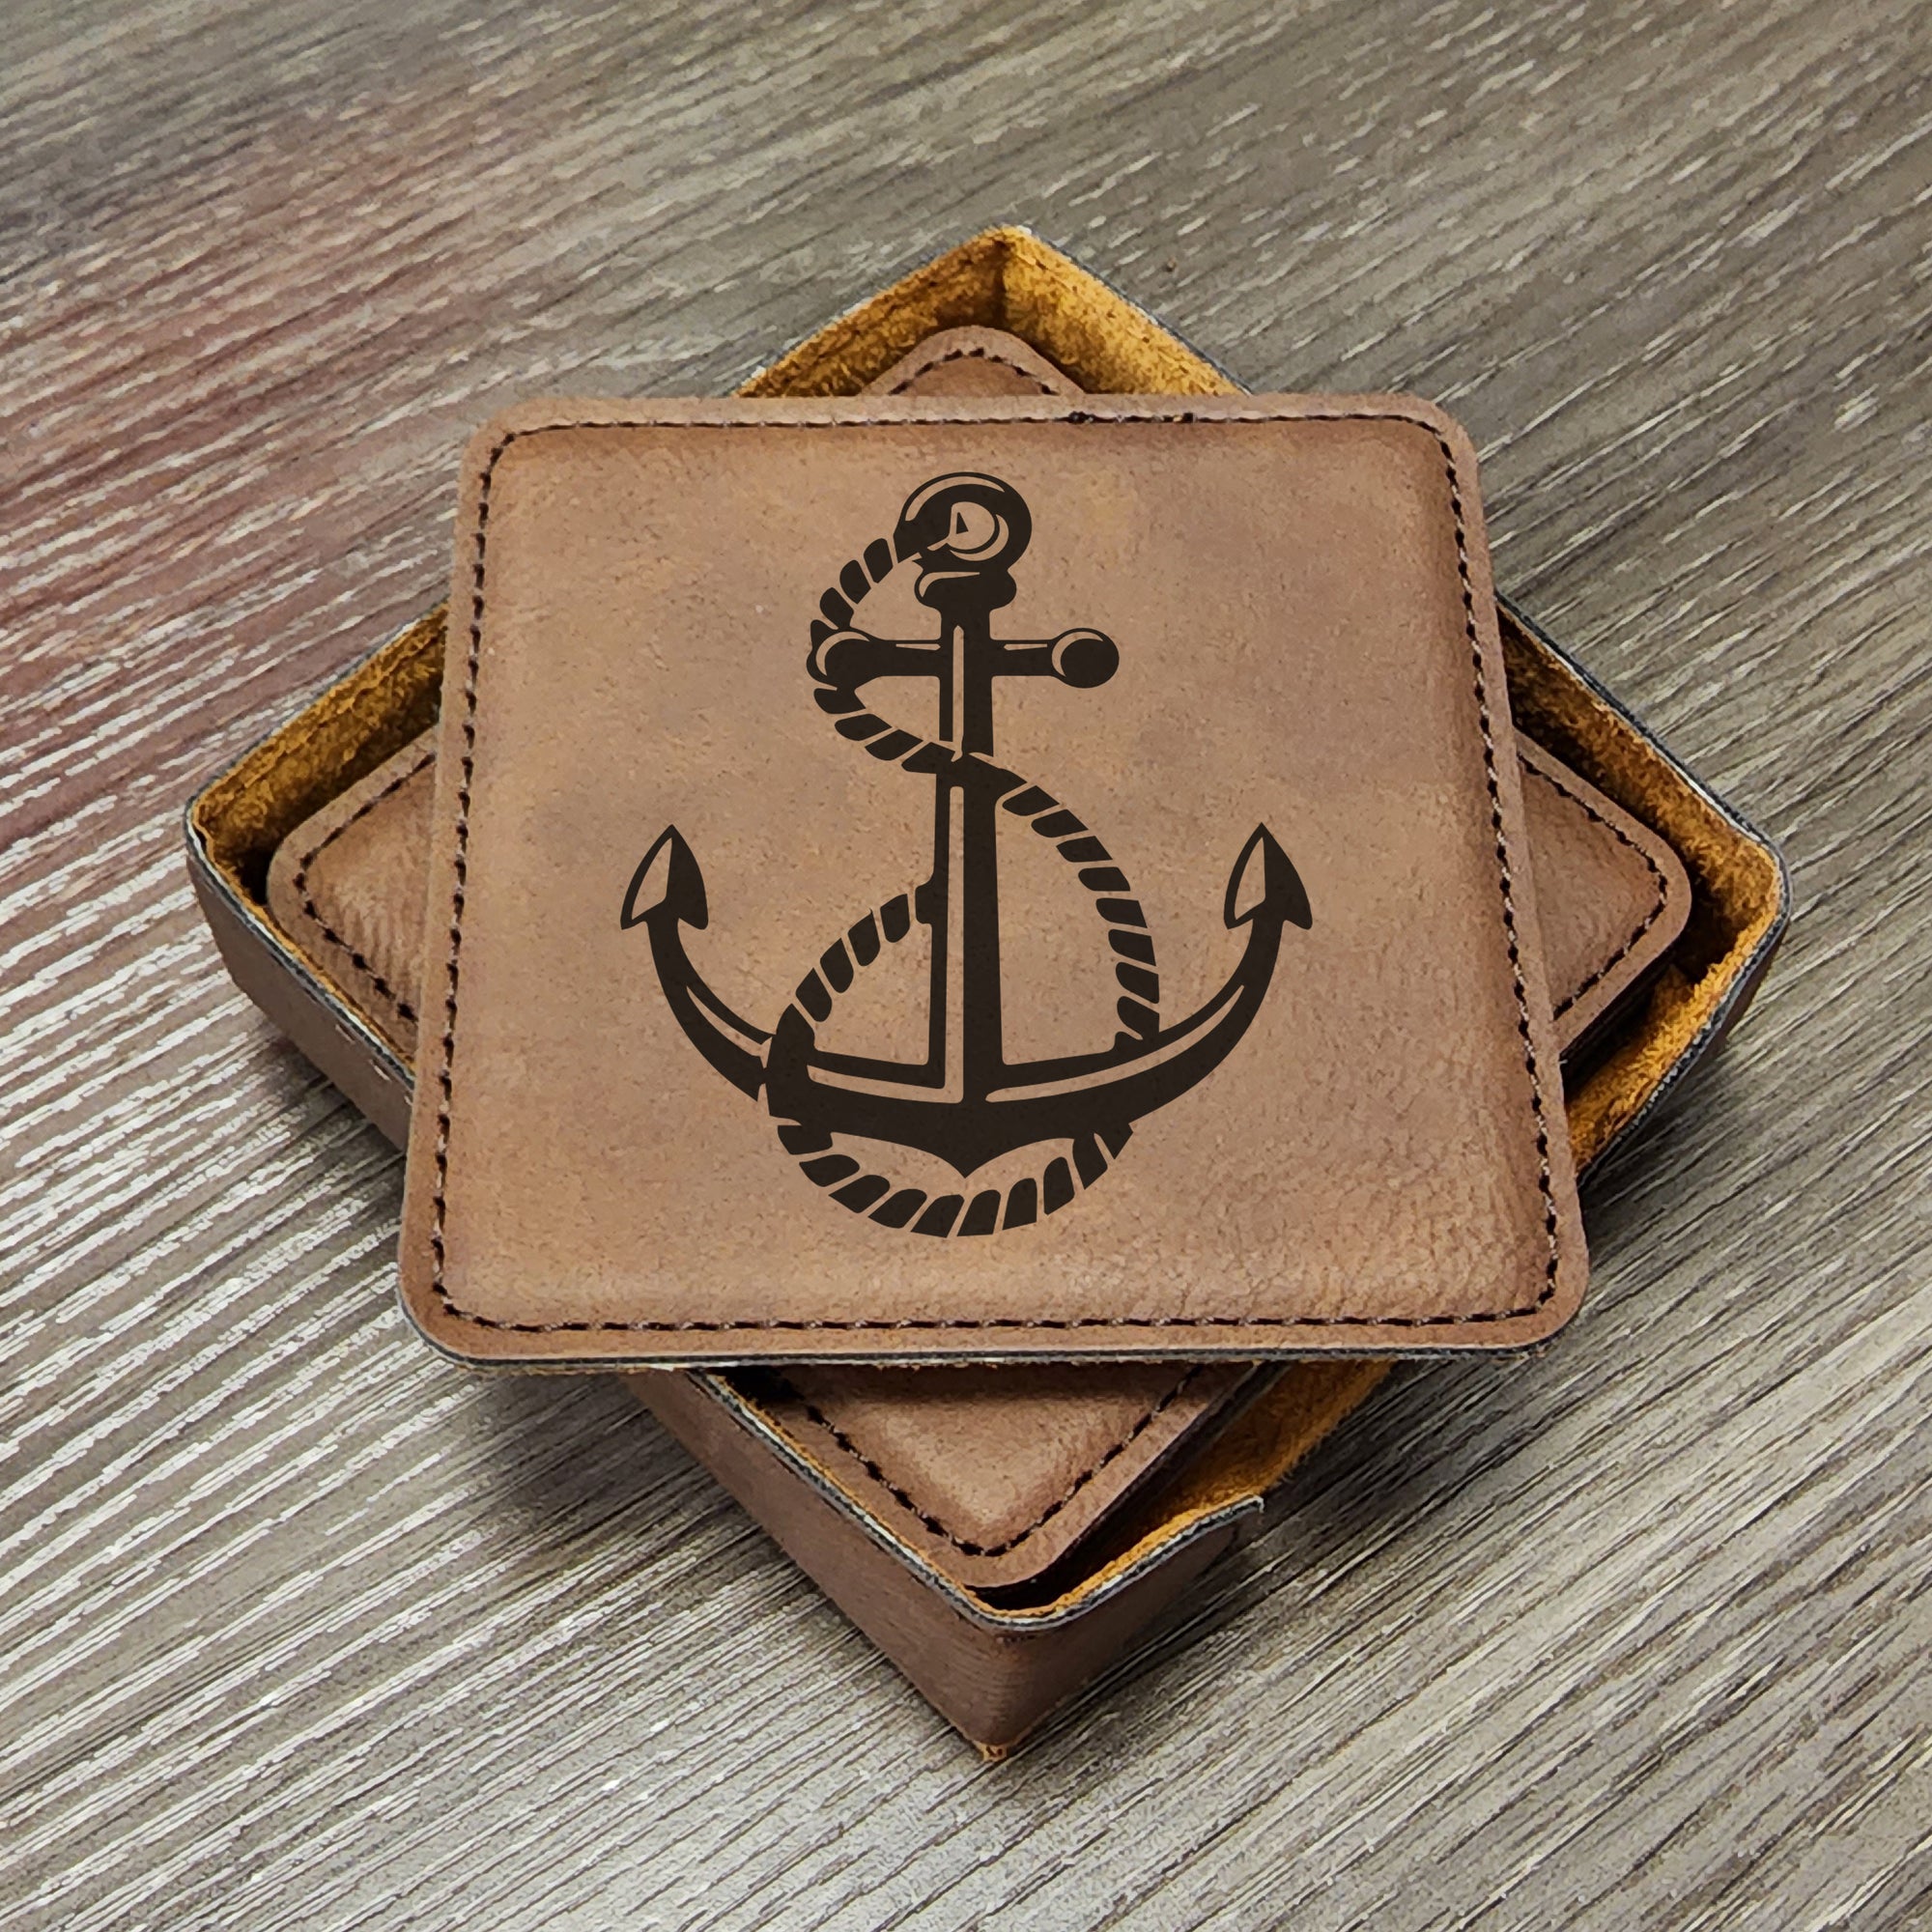 Nautical Coaster - Boating Coaster - Sailing Coaster - Anchor Coasters for Vacation Rentals - Father's Day Gifts - Set of 6 With Holder